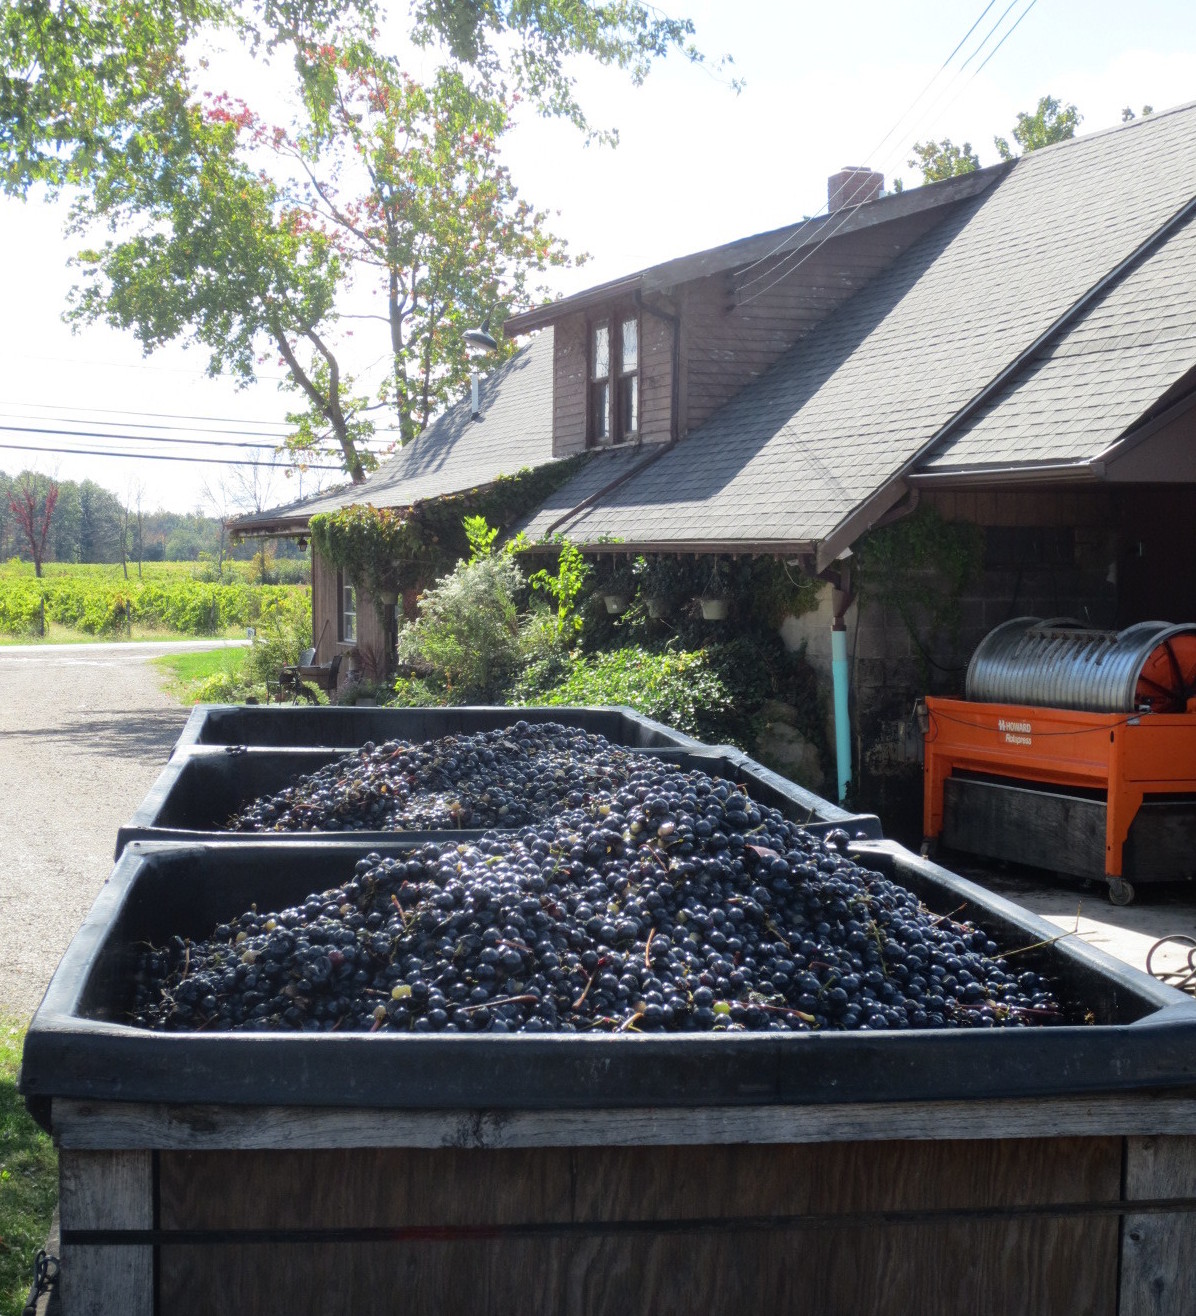 Grape Bins and grapes in front of the present winery